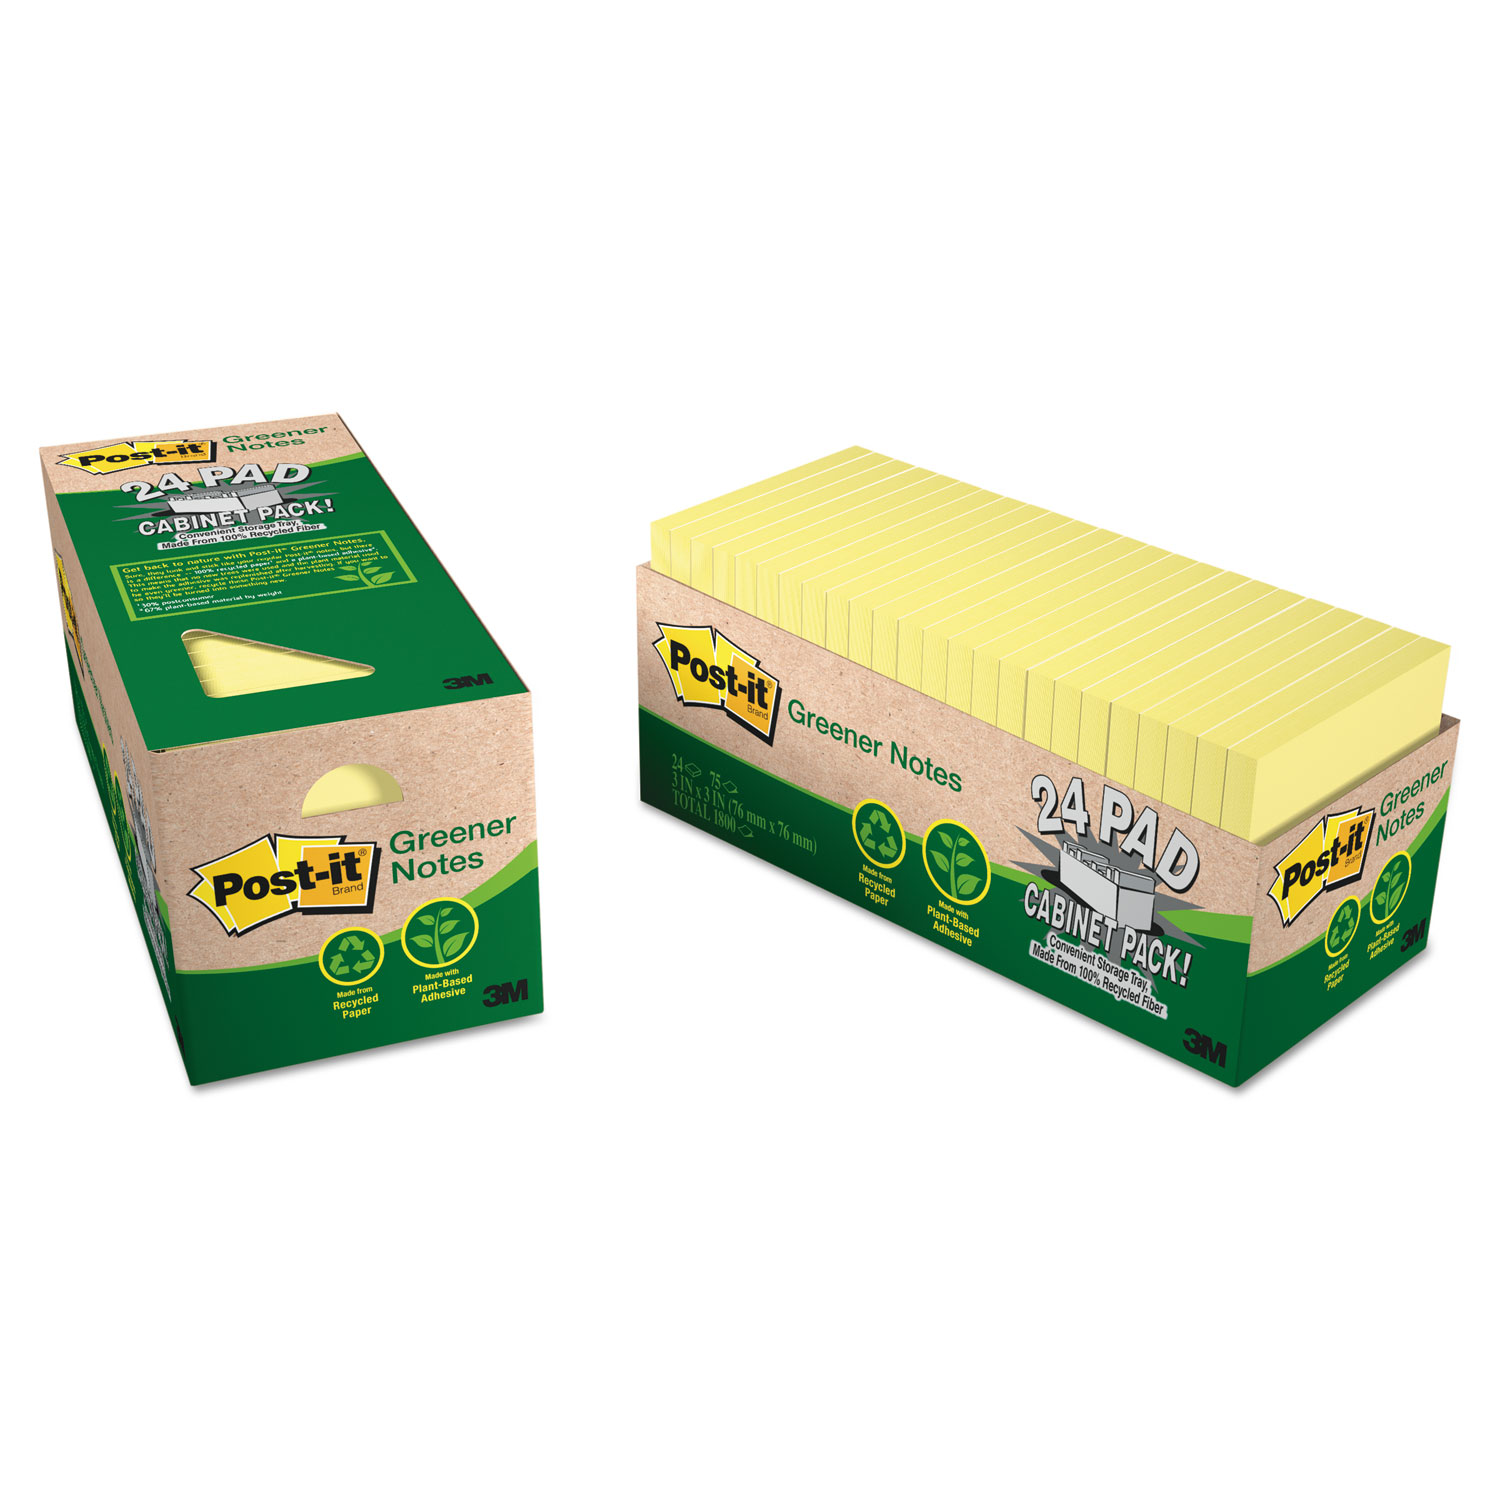  Post-it Greener Notes 654R-24CP-CY Recycled Note Pad Cabinet Pack, 3 x 3, Canary Yellow, 75-Sheet, 24/Pack (MMM654R24CPCY) 